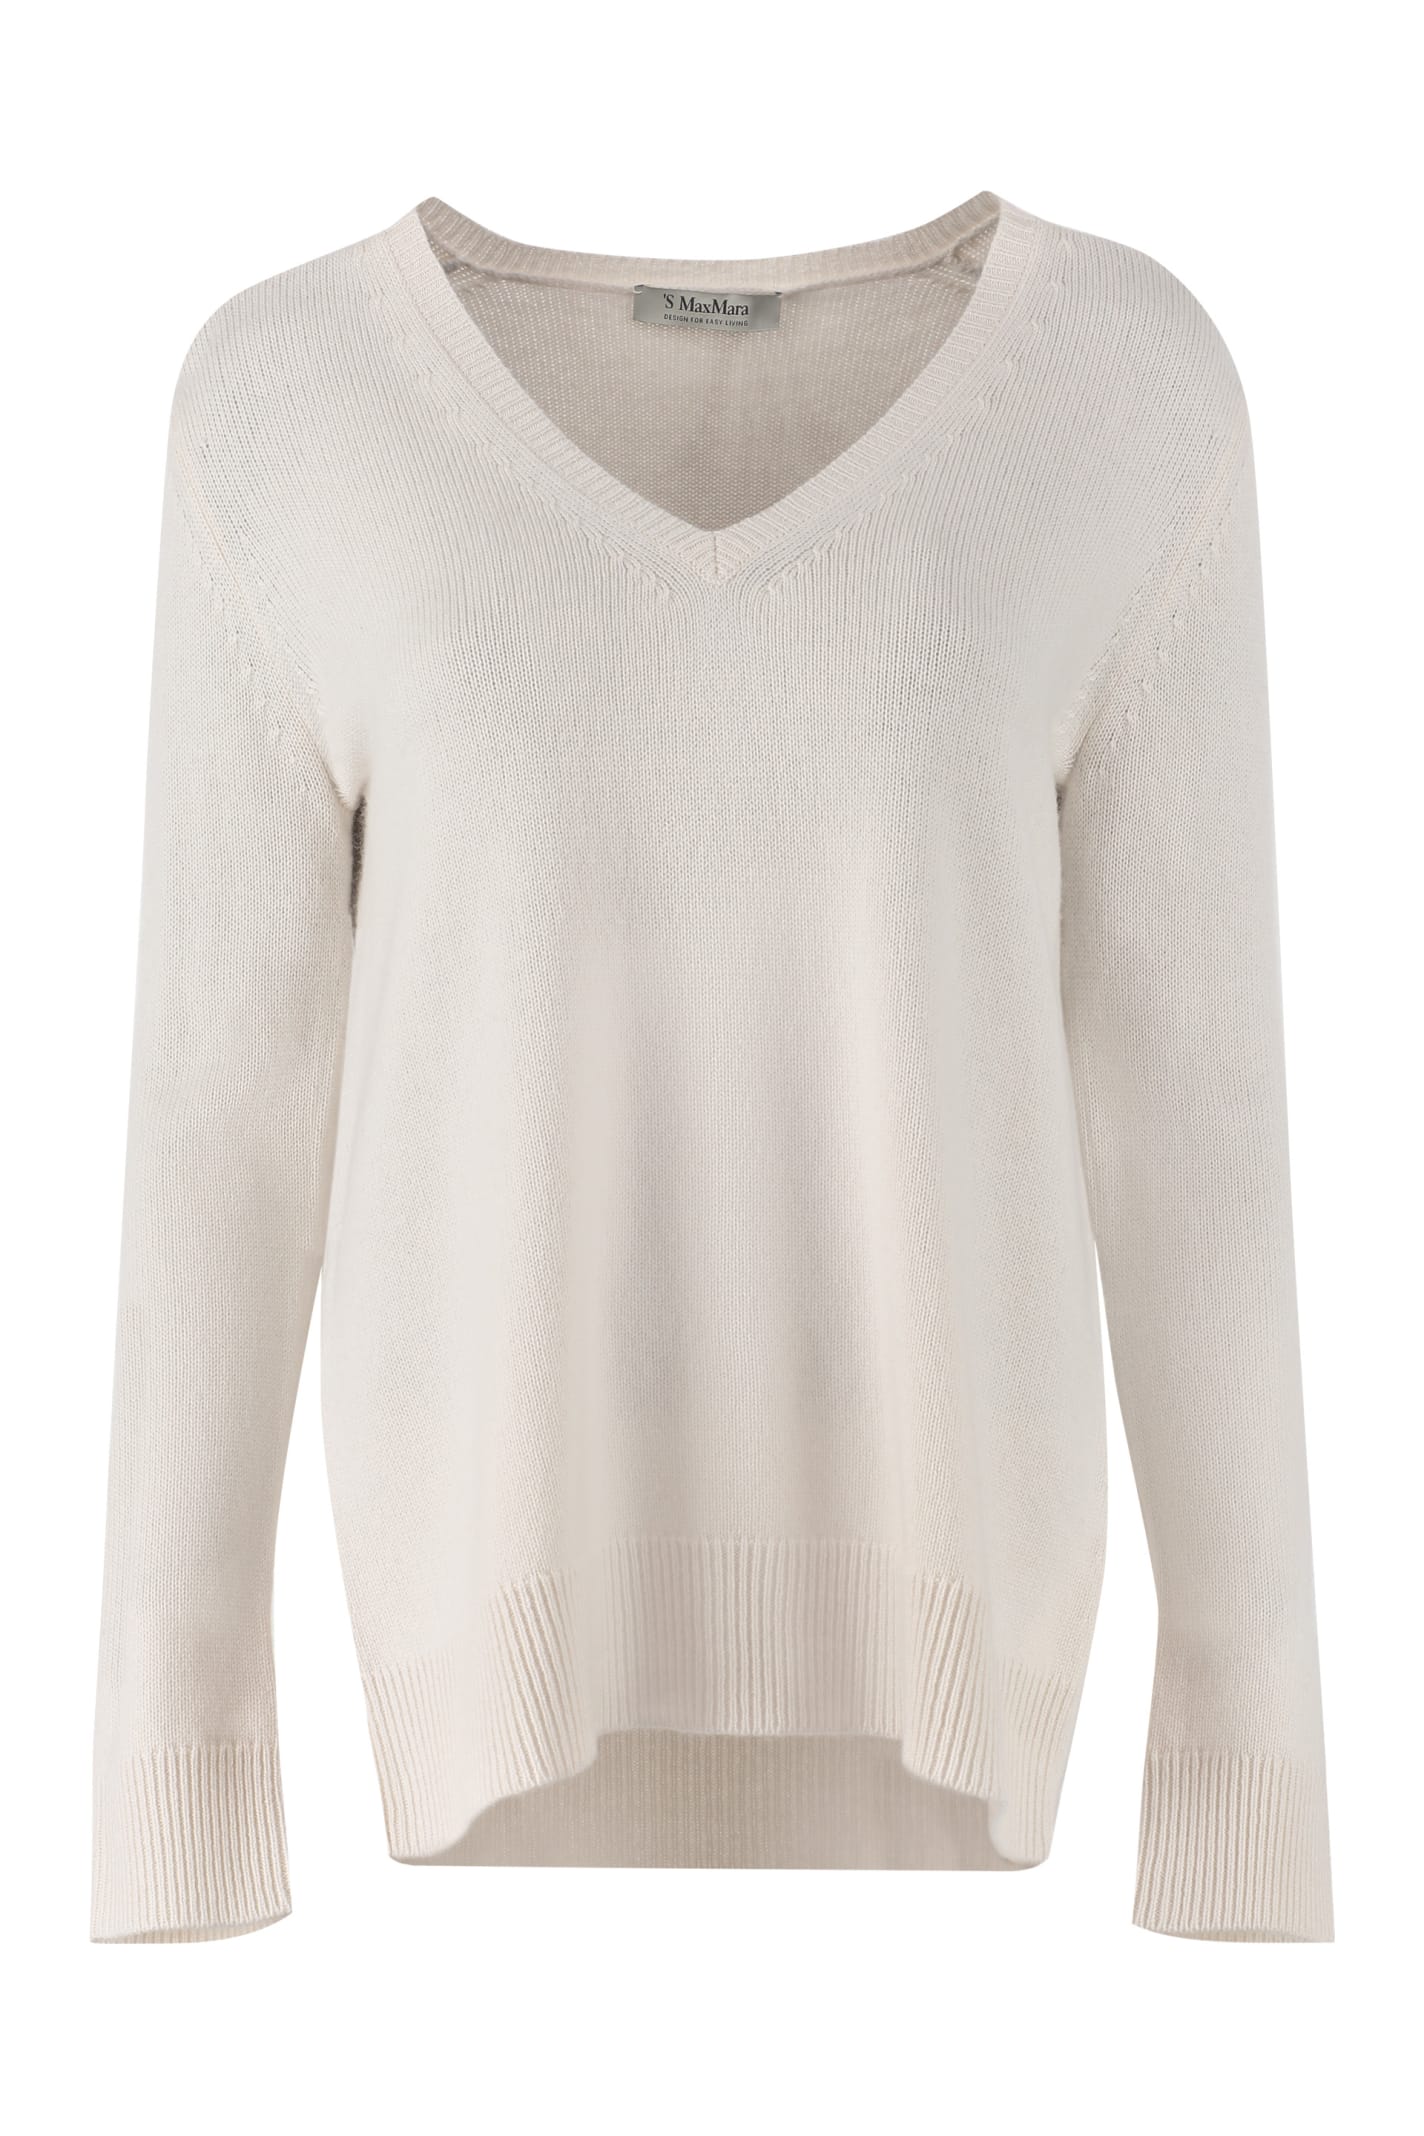 Max & Co. Verona Wool And Cashmere Pullover